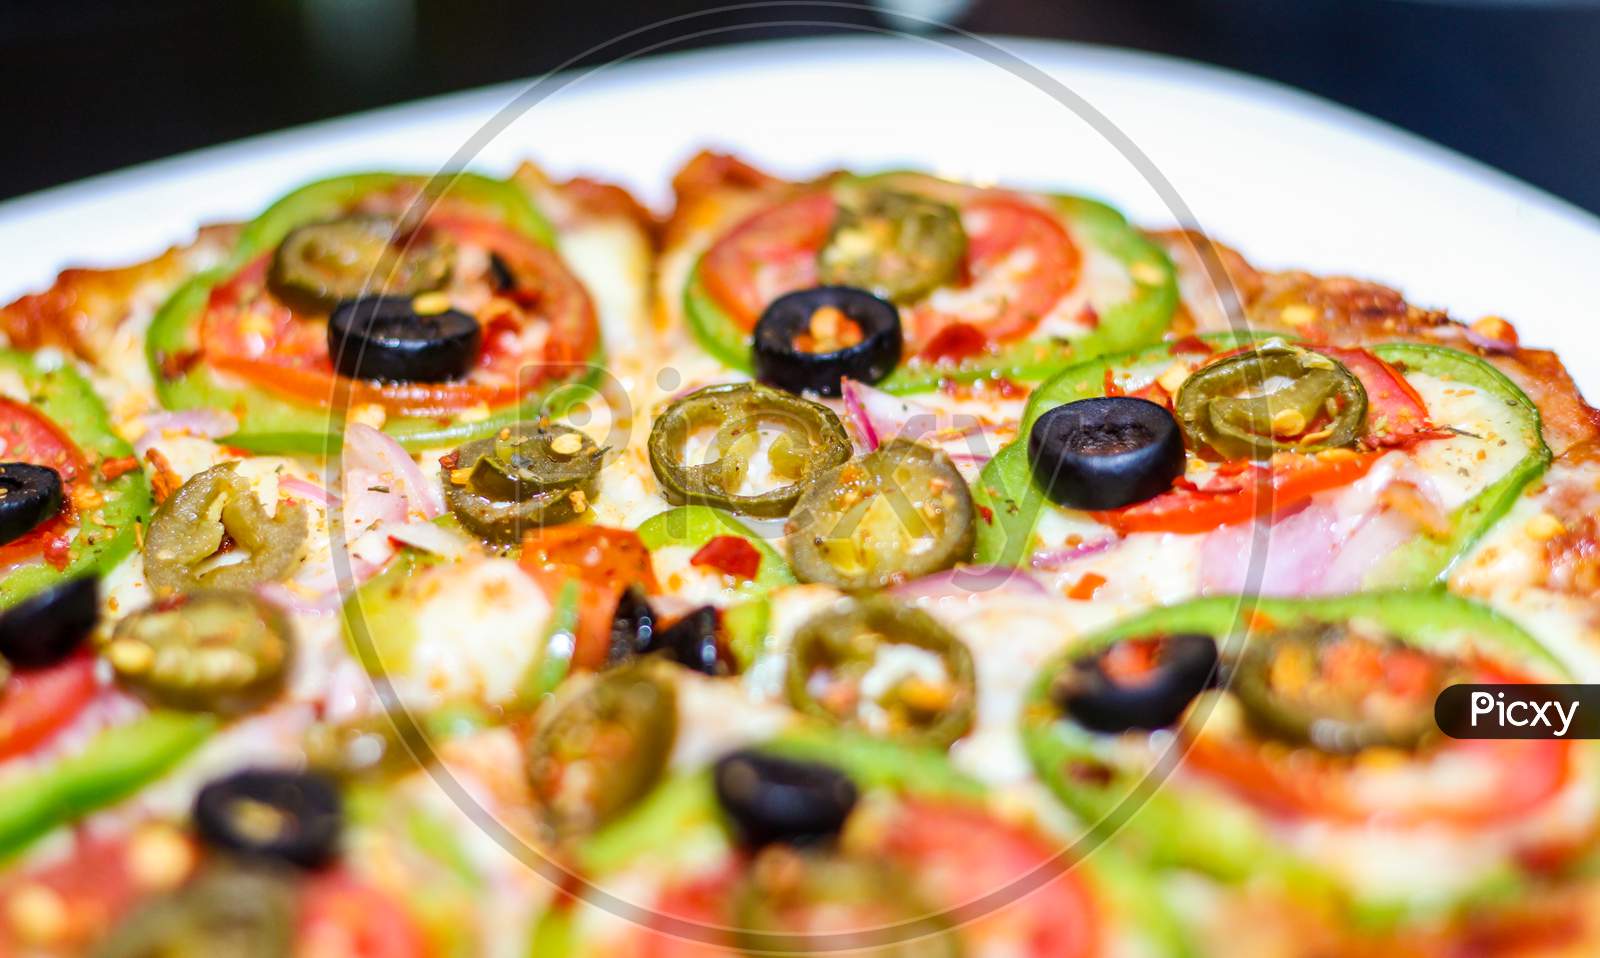 Fresh Homemade Pizza With Vegetables, Tomato, Onion And Olives Isolated On White Plate.